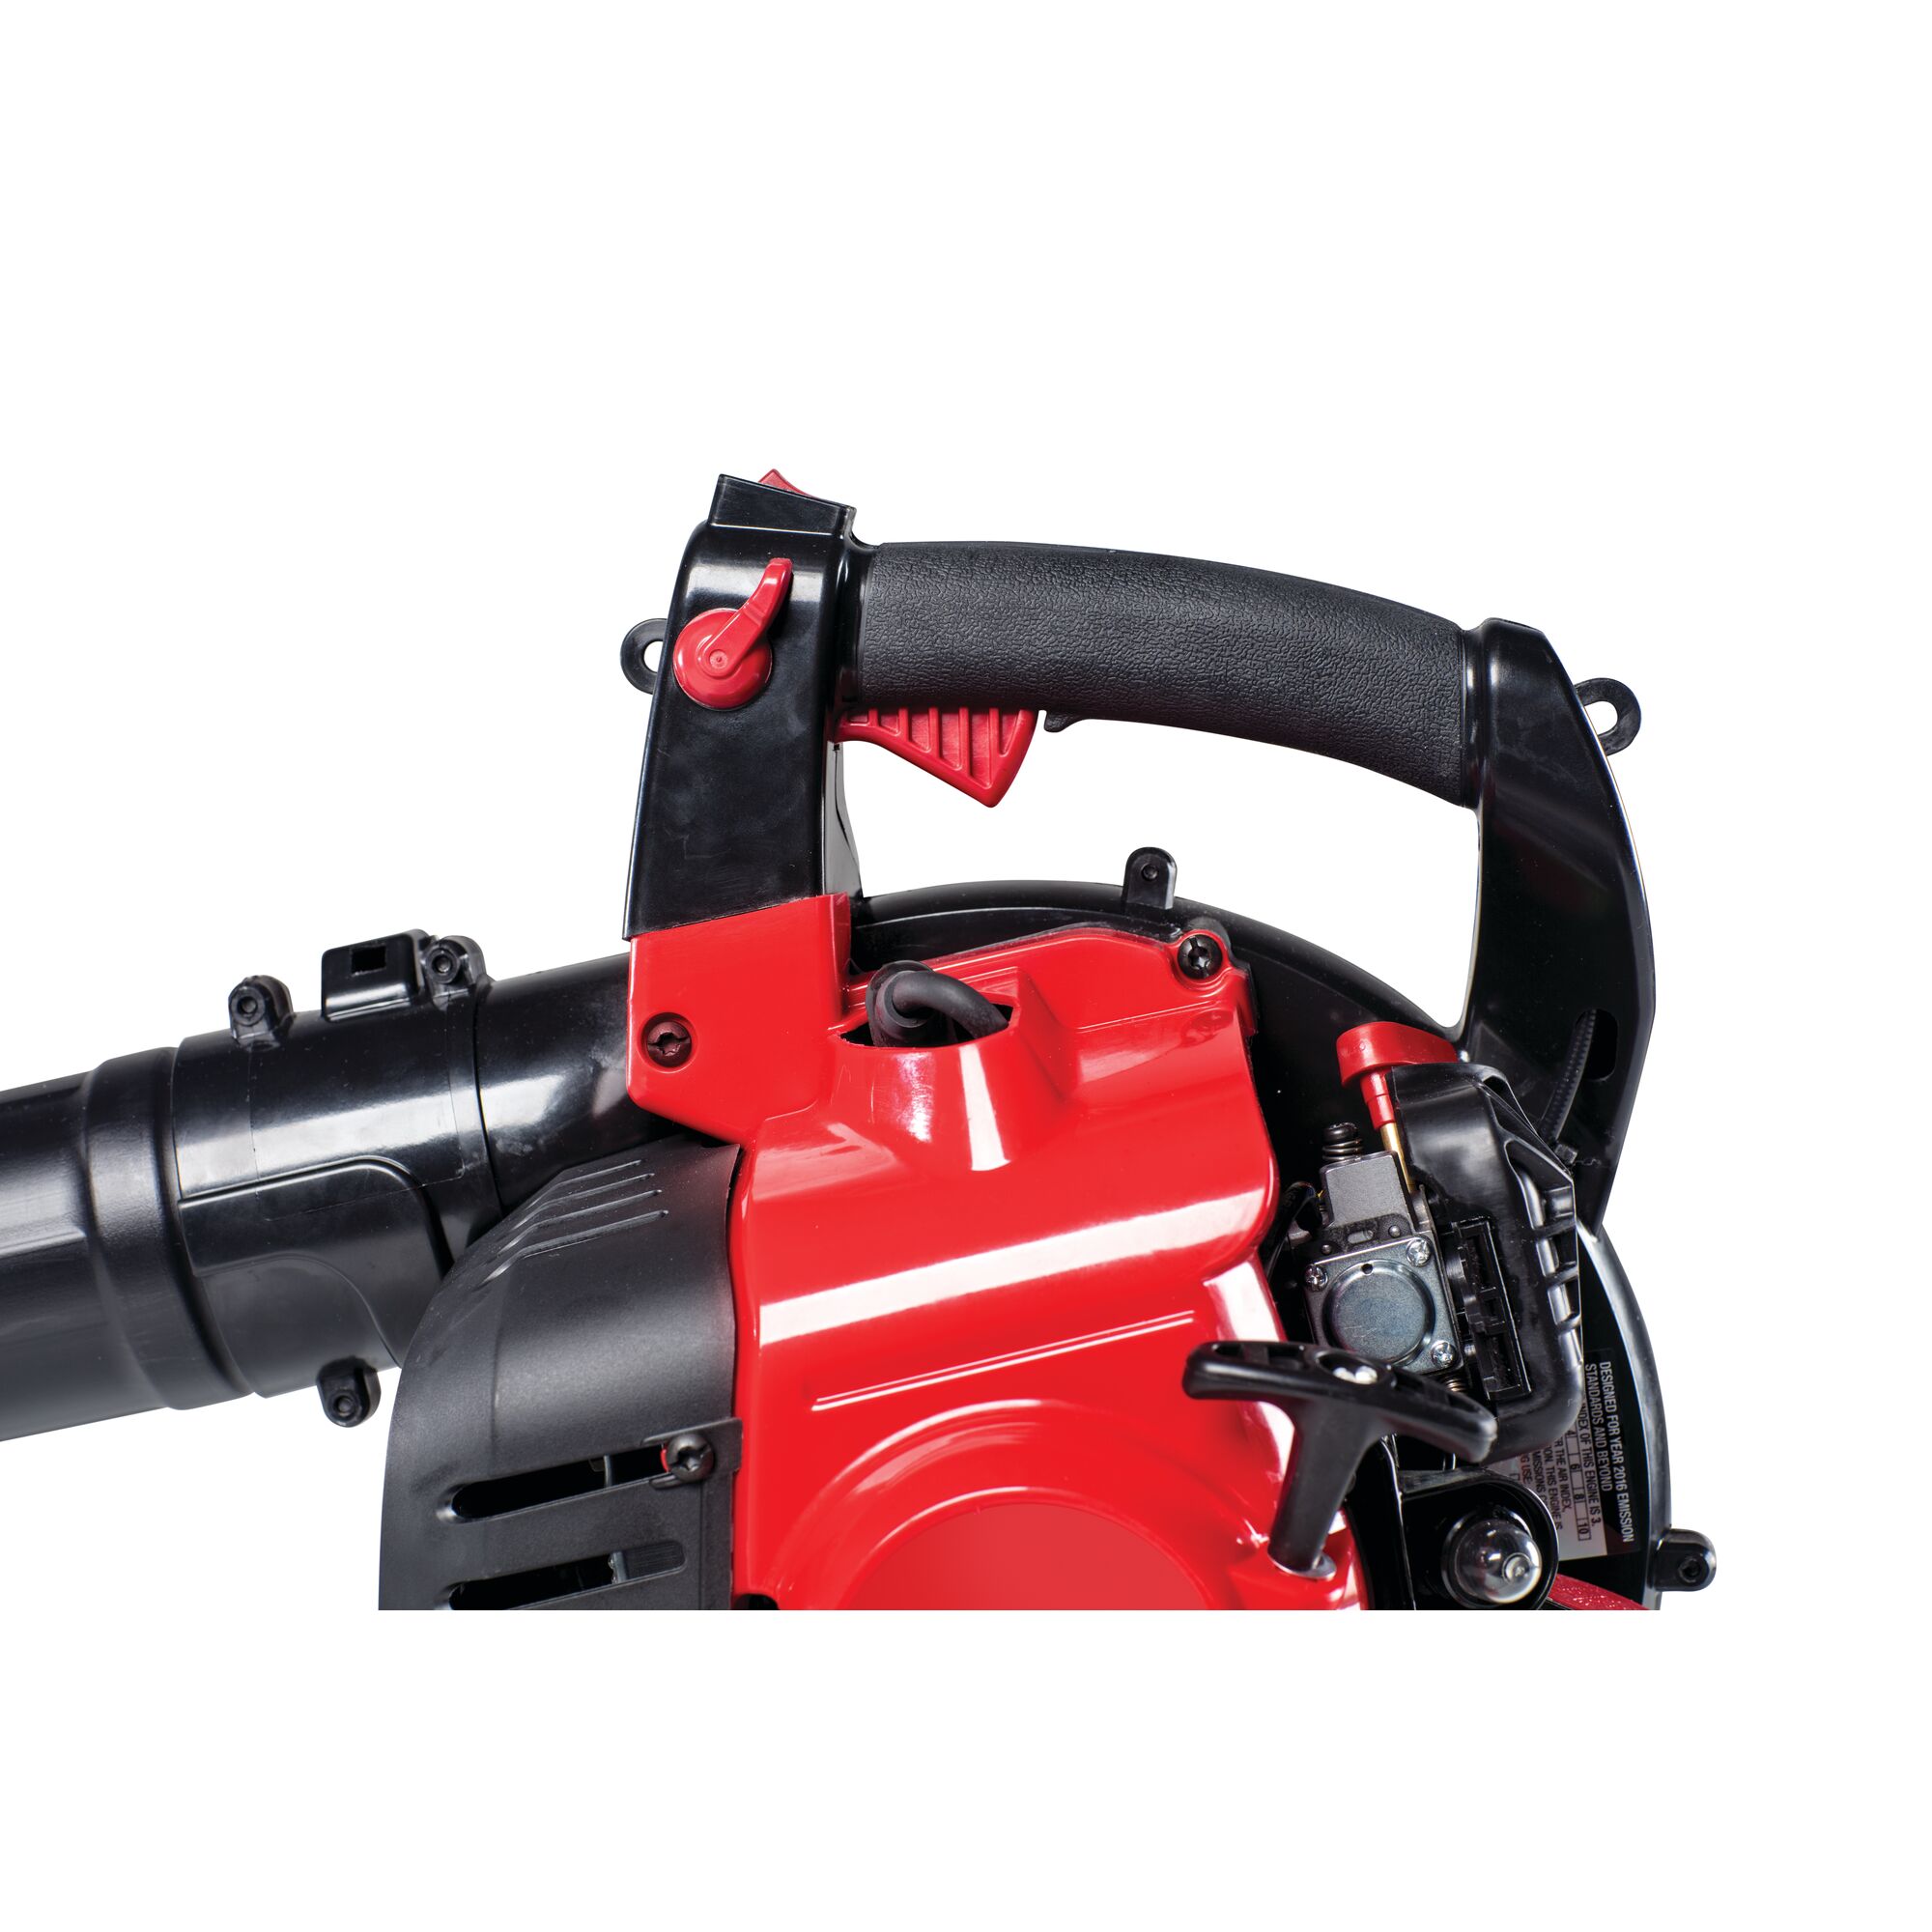 Comfort over mold handle feature of 27 C C 2 cycle full crank engine gas leaf blower vacuum.